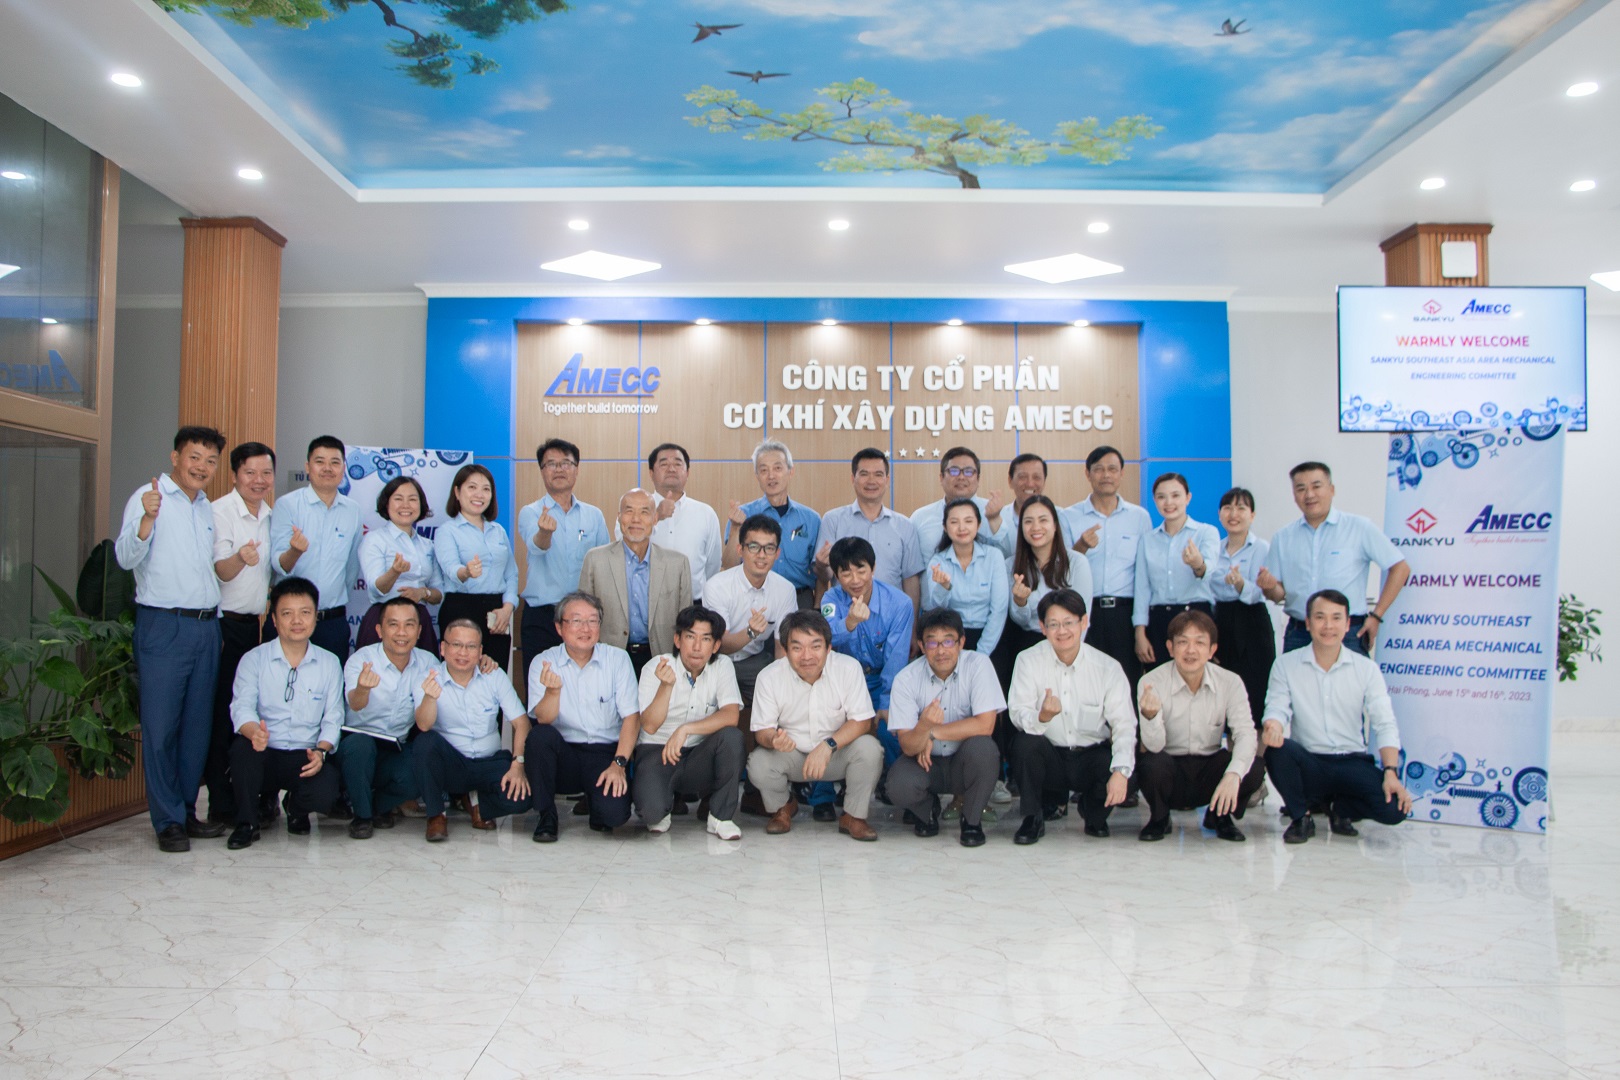 The Southeast Asia Mechanical Engineering Technical Committee of SANKYU - Organized a meeting at Amecc